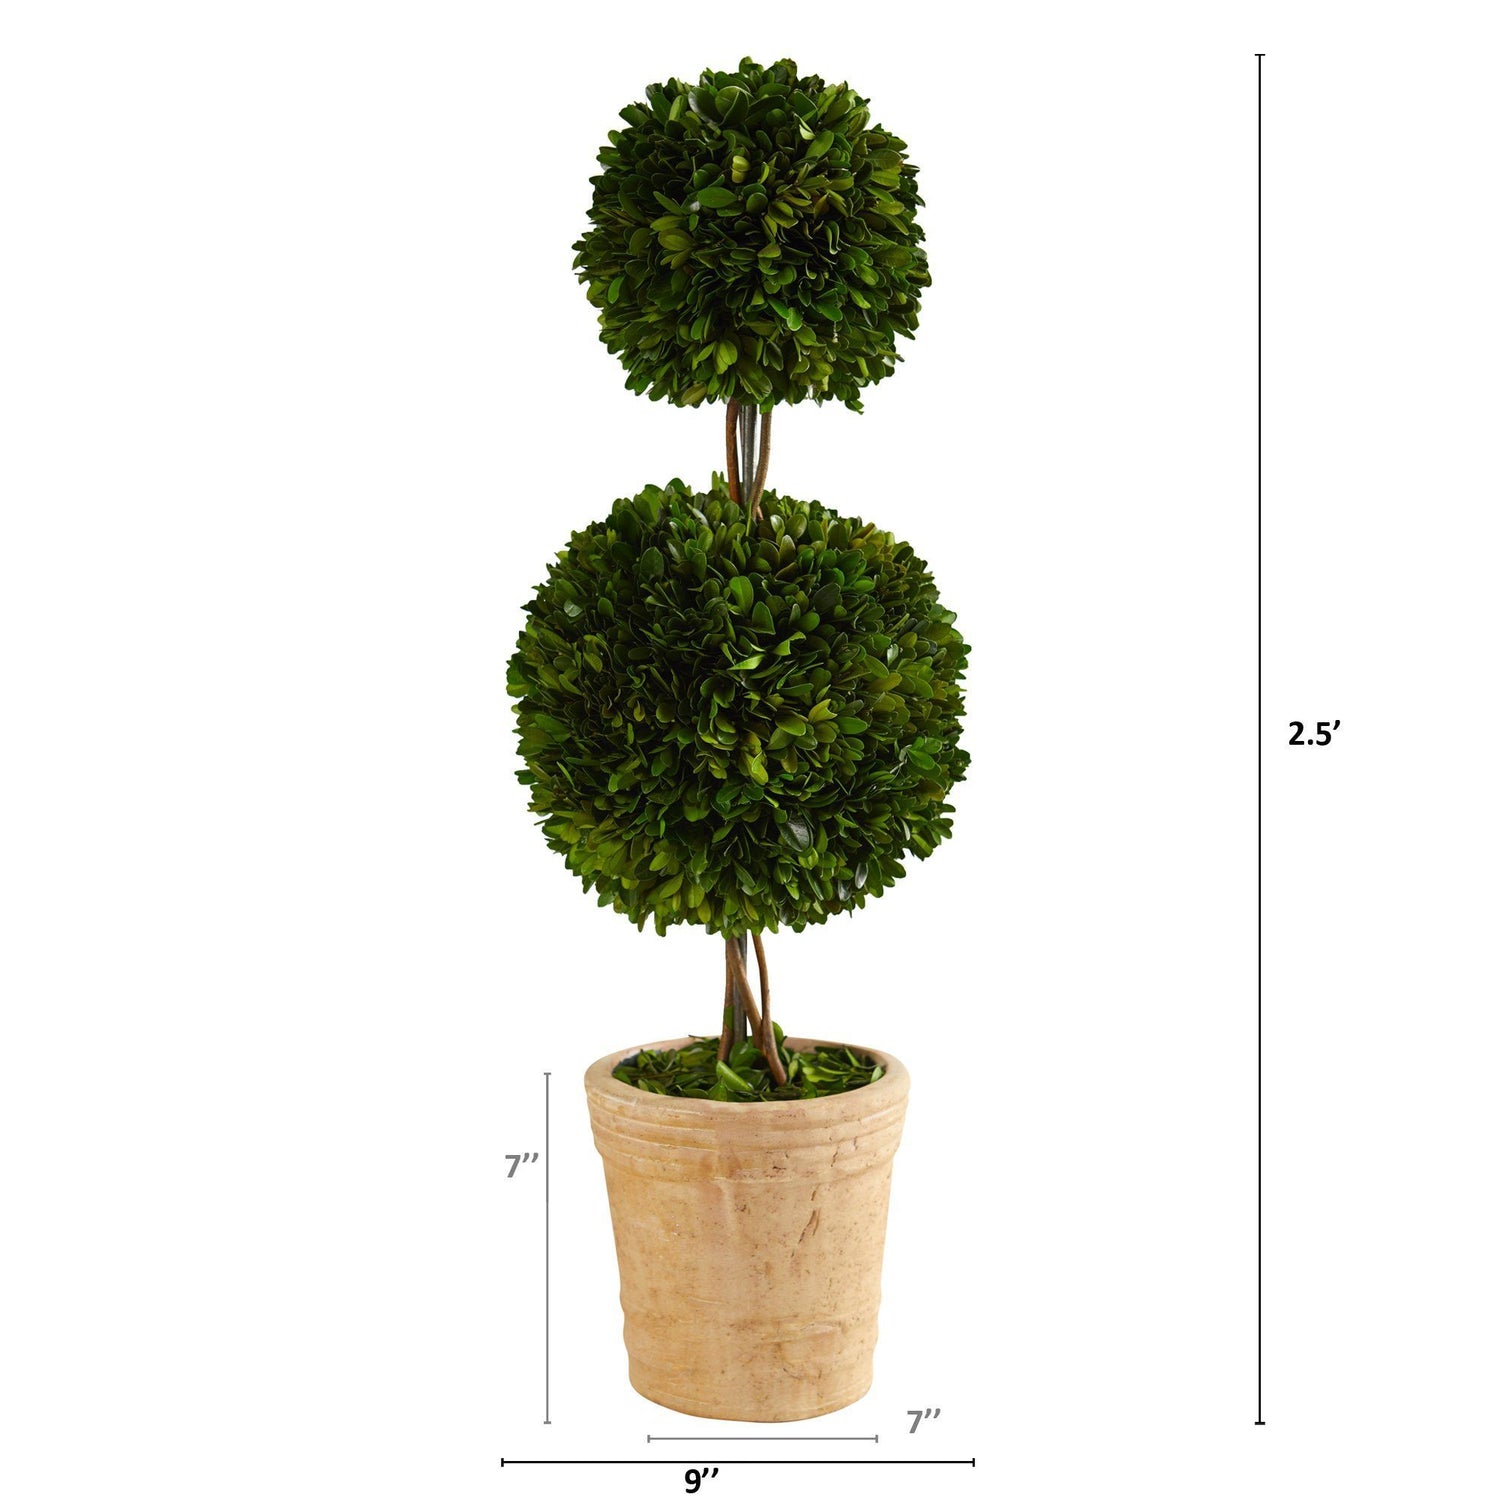 2.5’ Preserved Boxwood Double Ball Topiary Tree in Decorative Planter